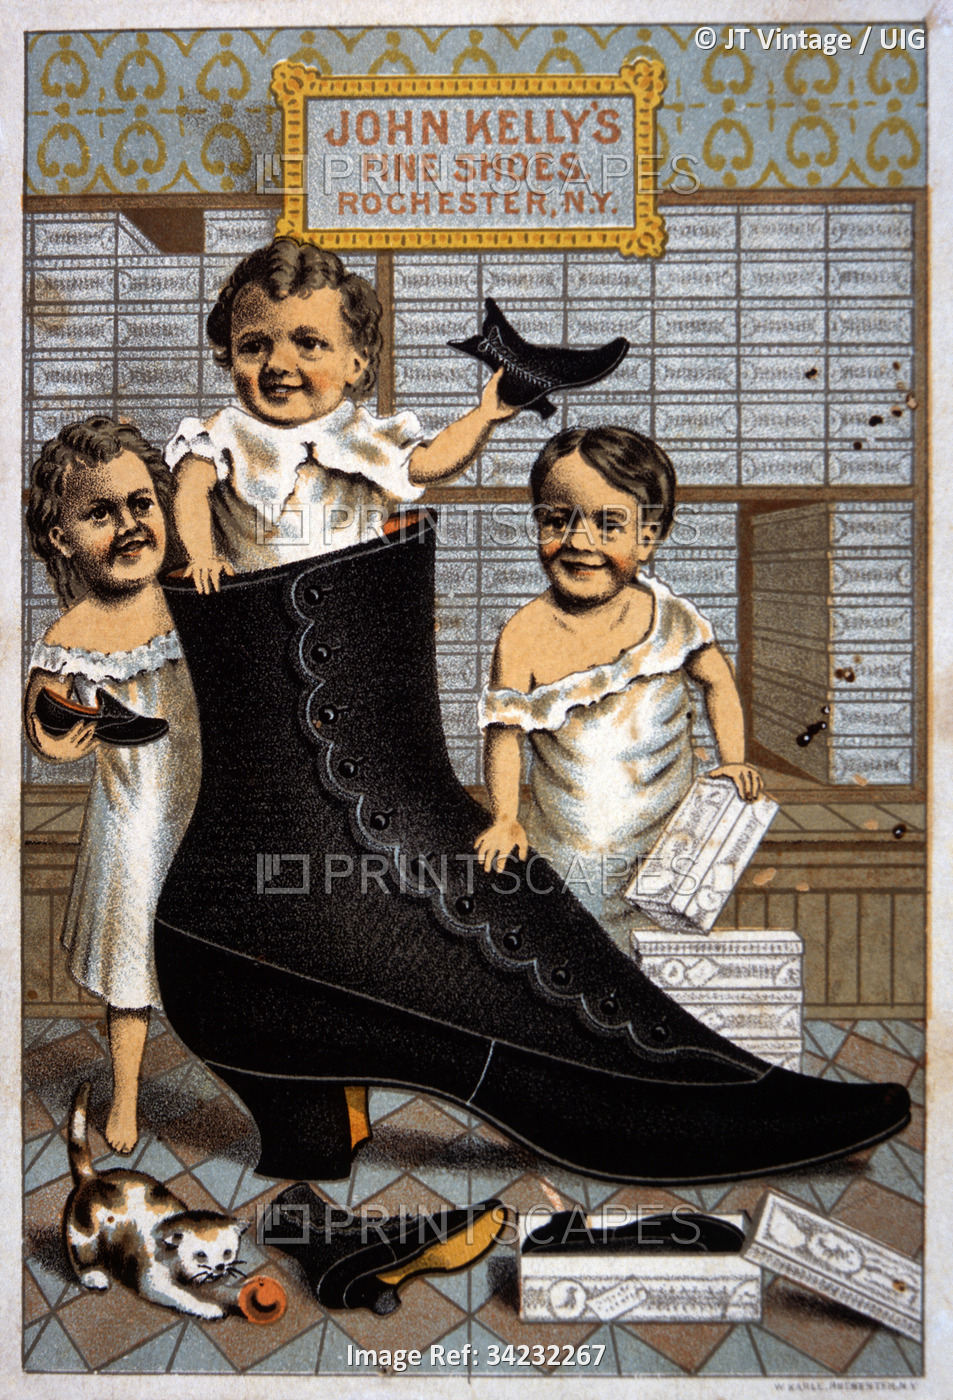 Children Standing with Large Shoe, John Kelly's Fine Shoes, Trade Card, circa ...